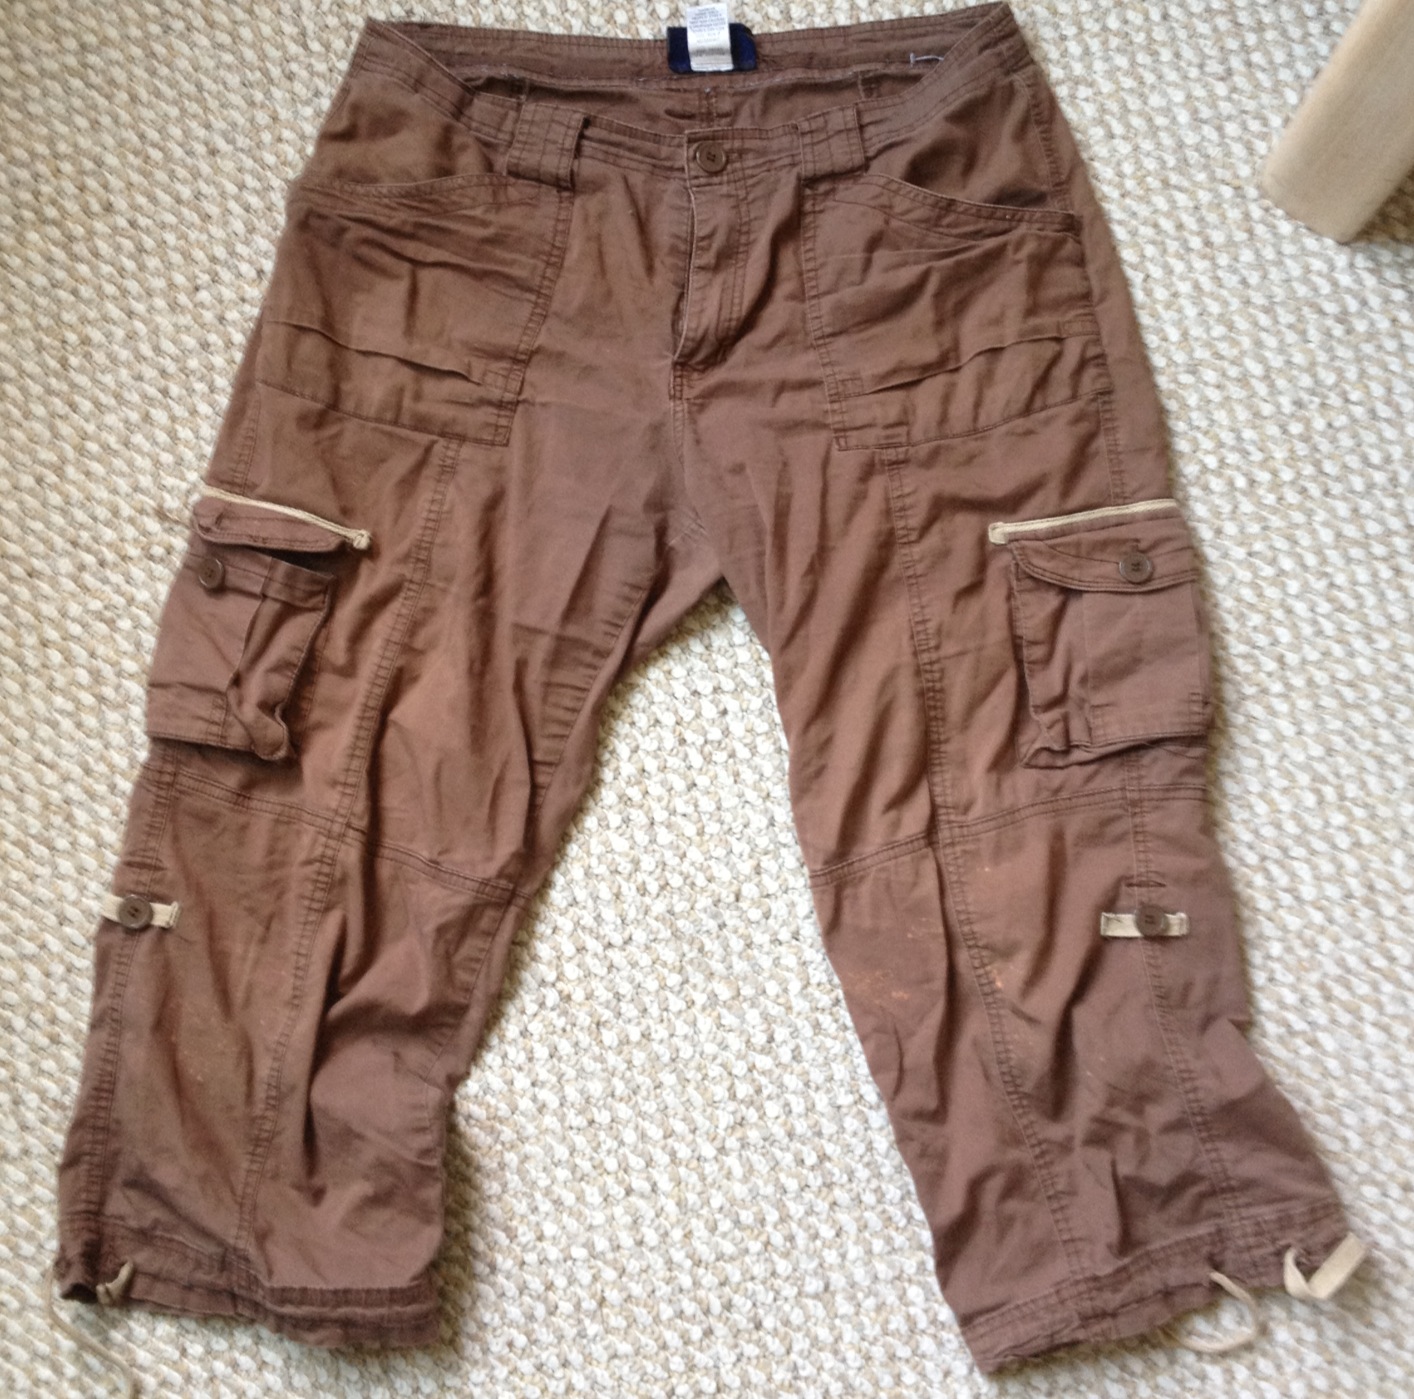 Retro Rack: How to Make a Steampunk Pocket Belt from Old Cargo Shorts ...